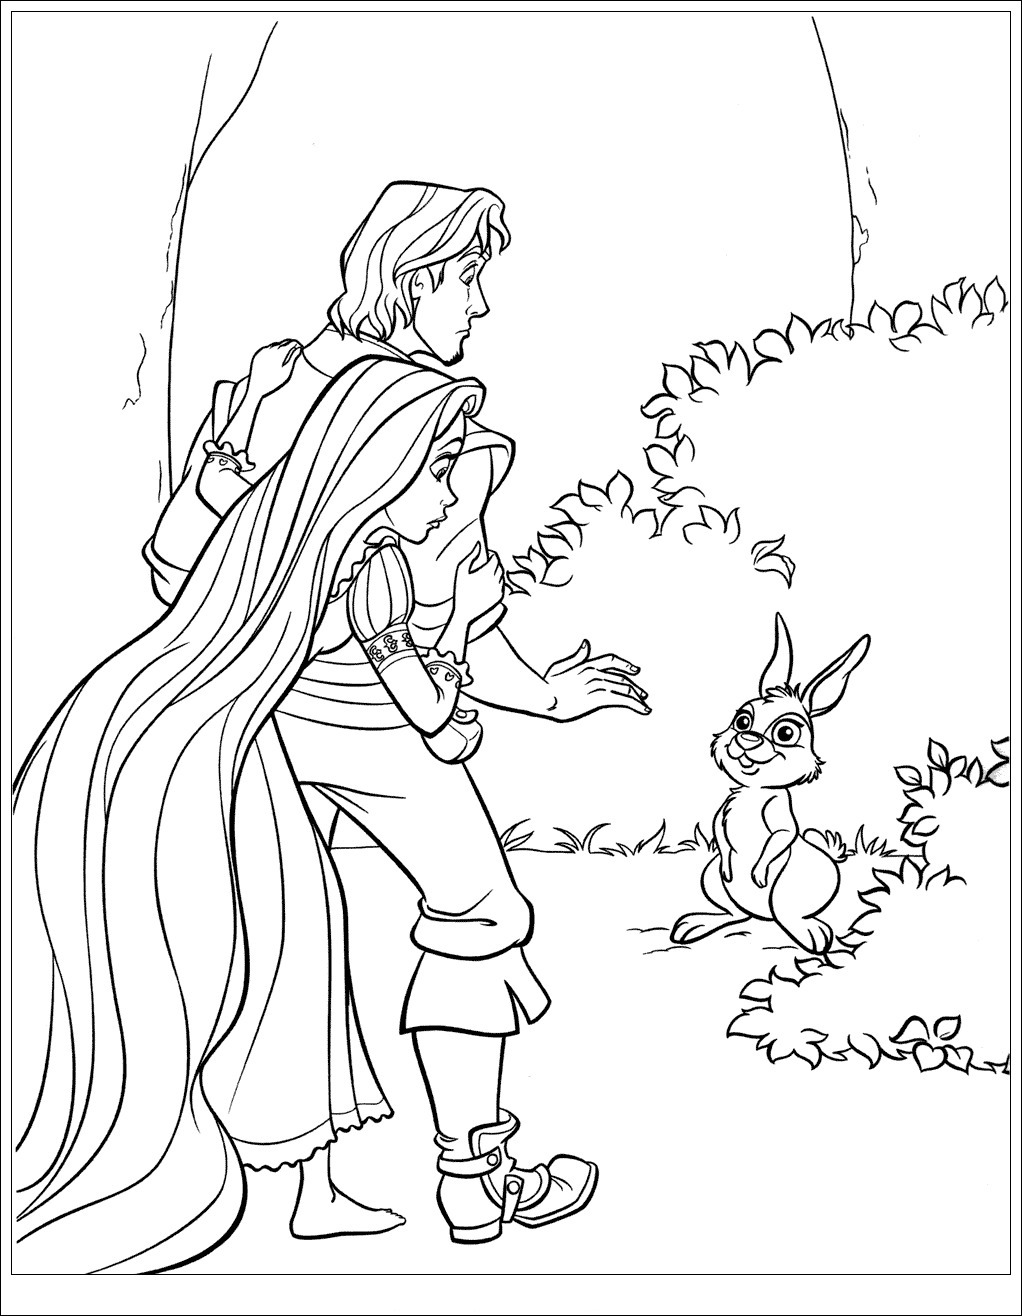 Flynn and rabbit from Rapunzel